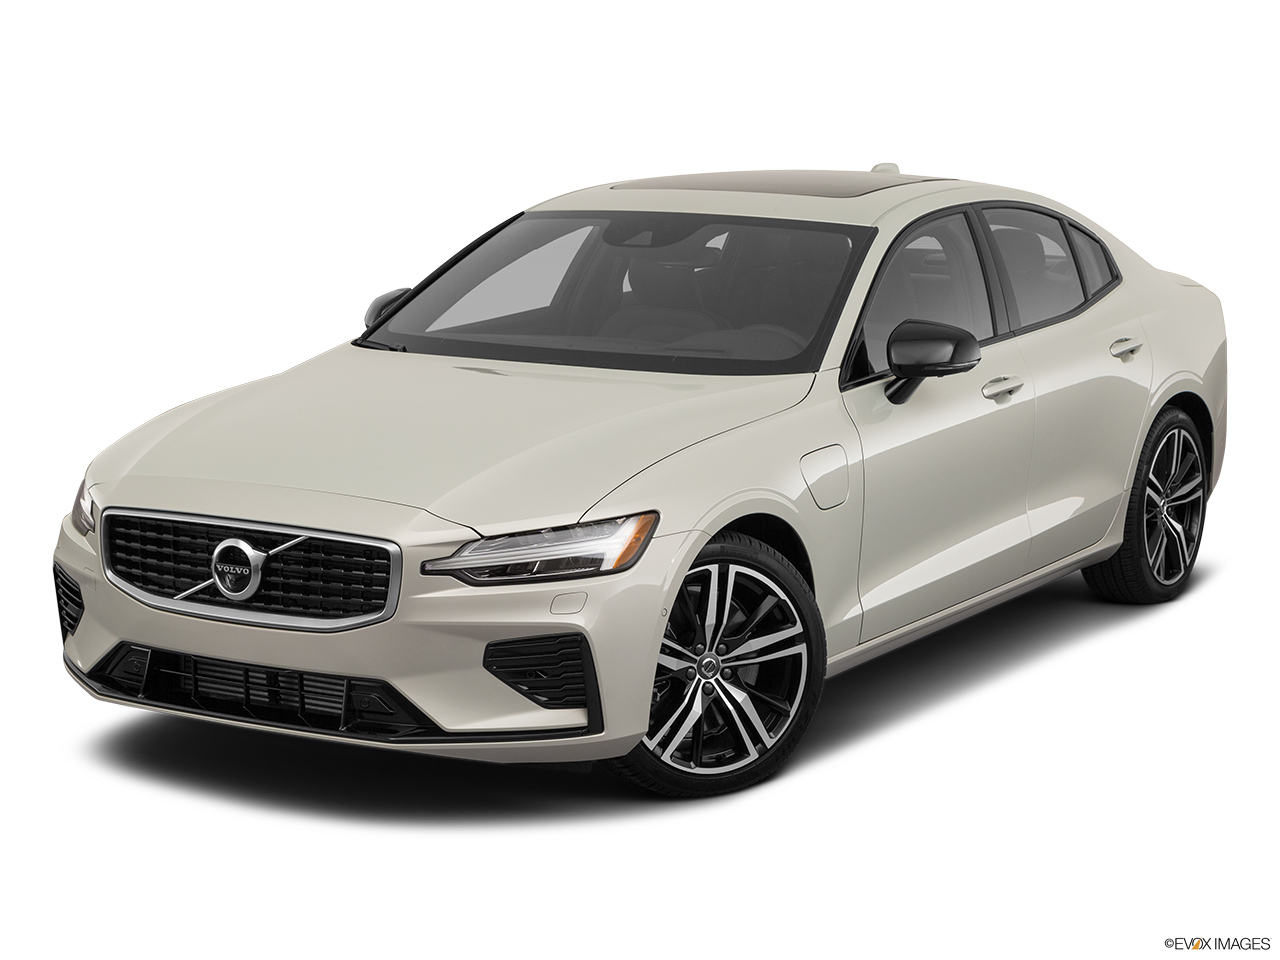 2020 Volvo S60 T8 R-Design eAWD Plug-in Hybrid Front angle view. 